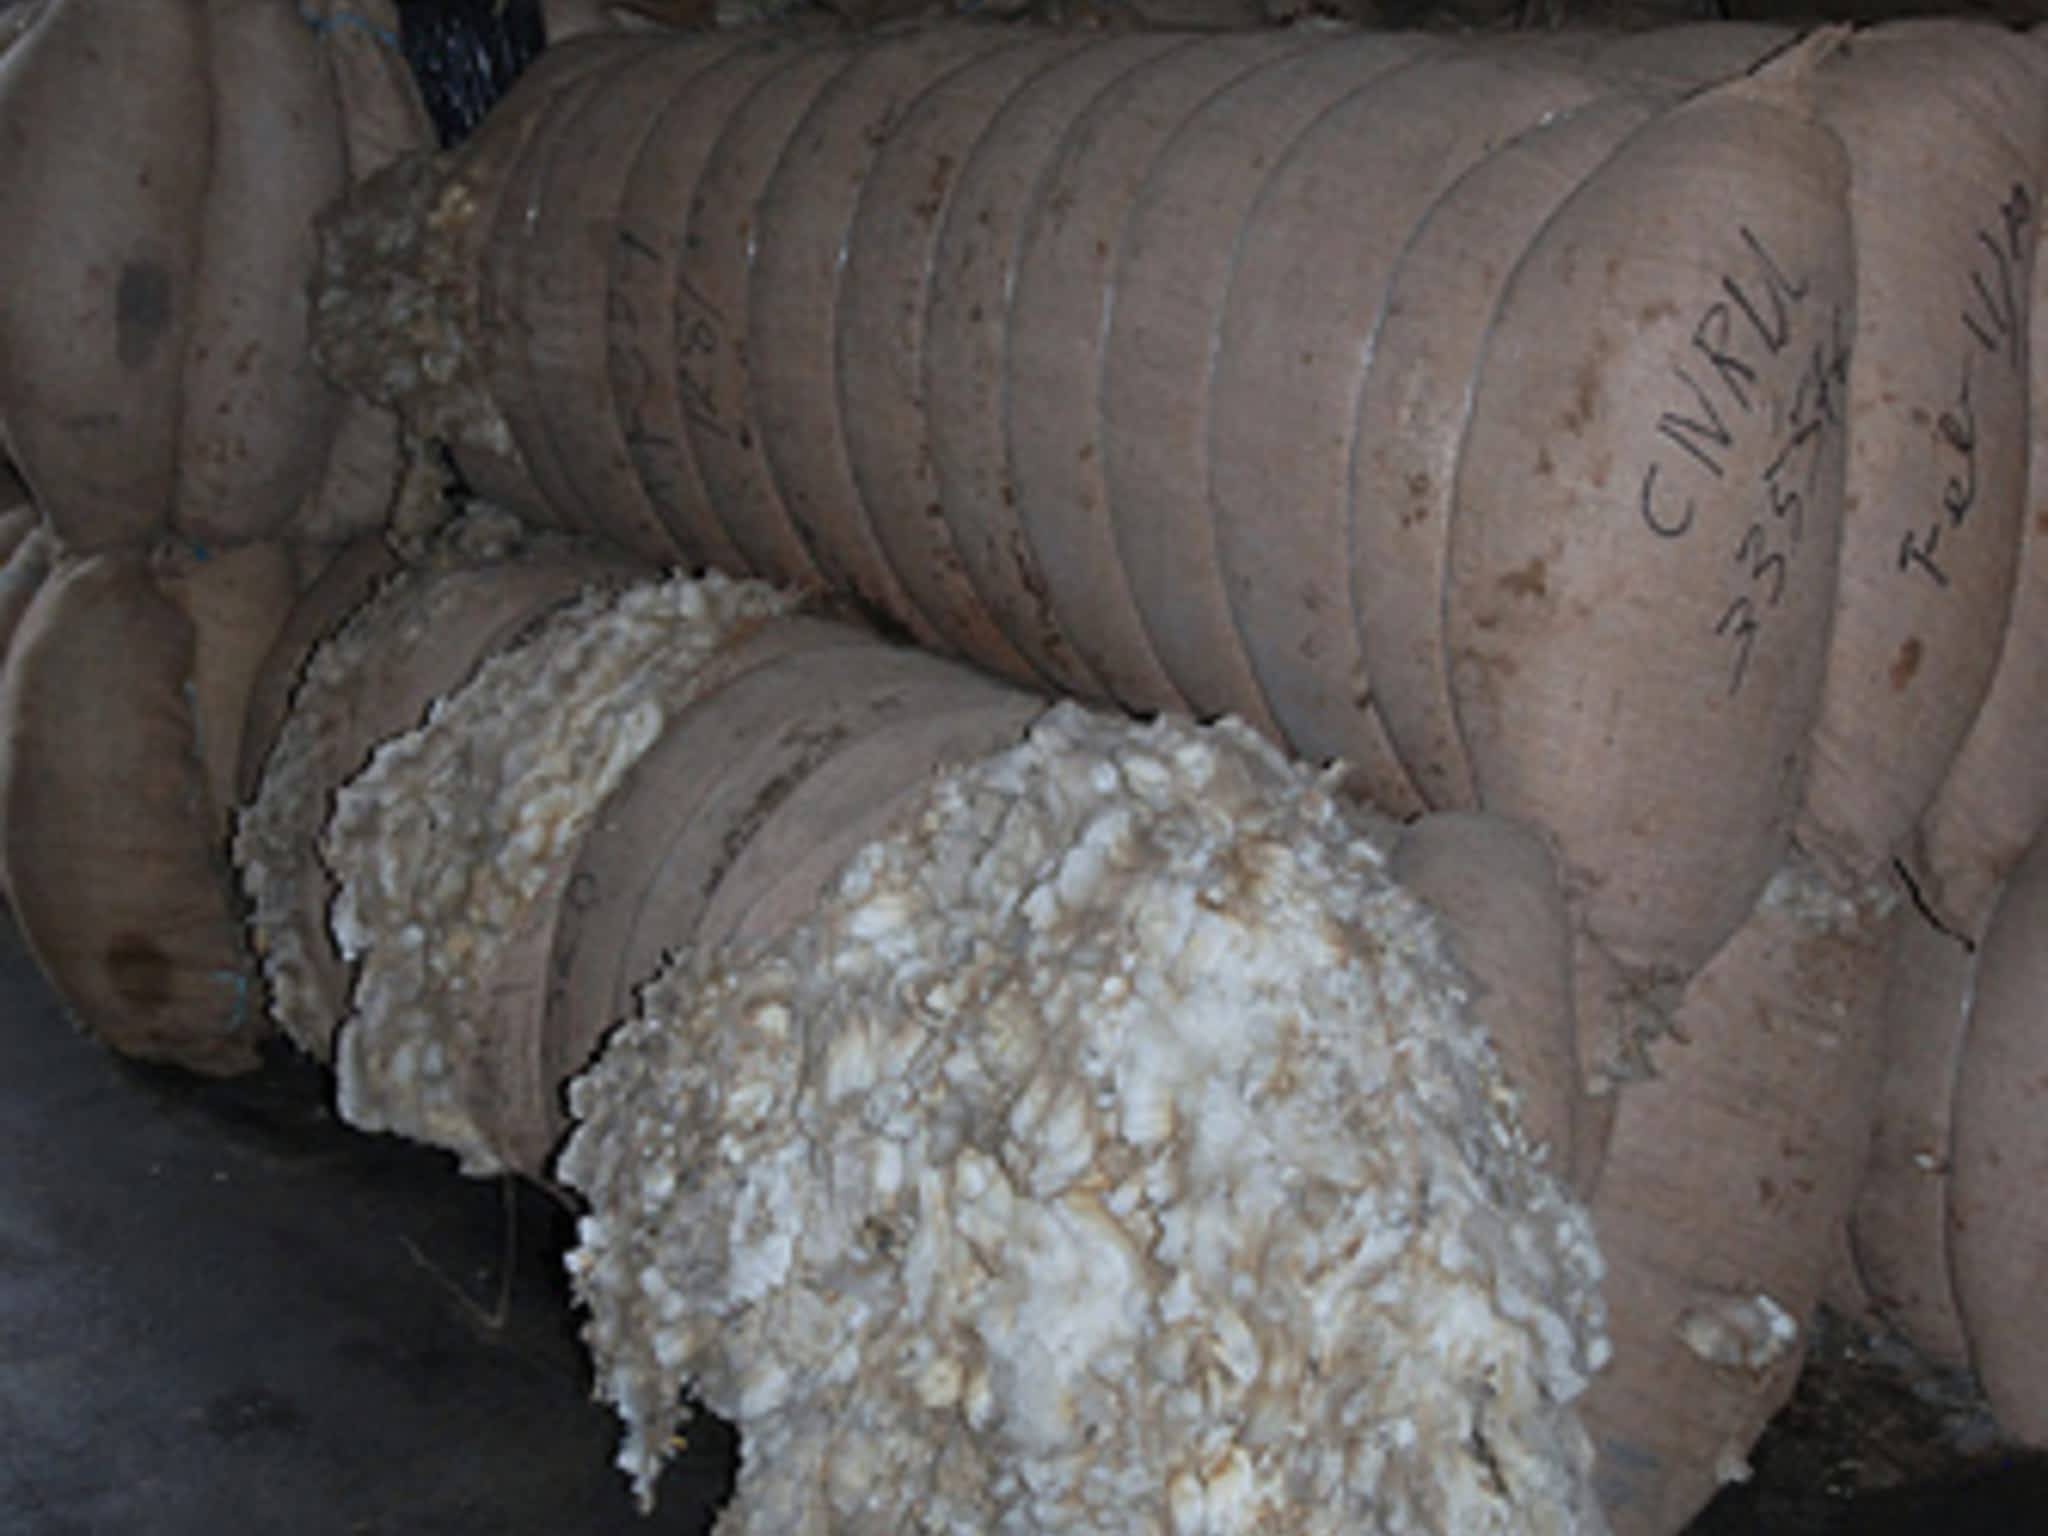 photo Canadian Co-Operative Wool Growers Limited